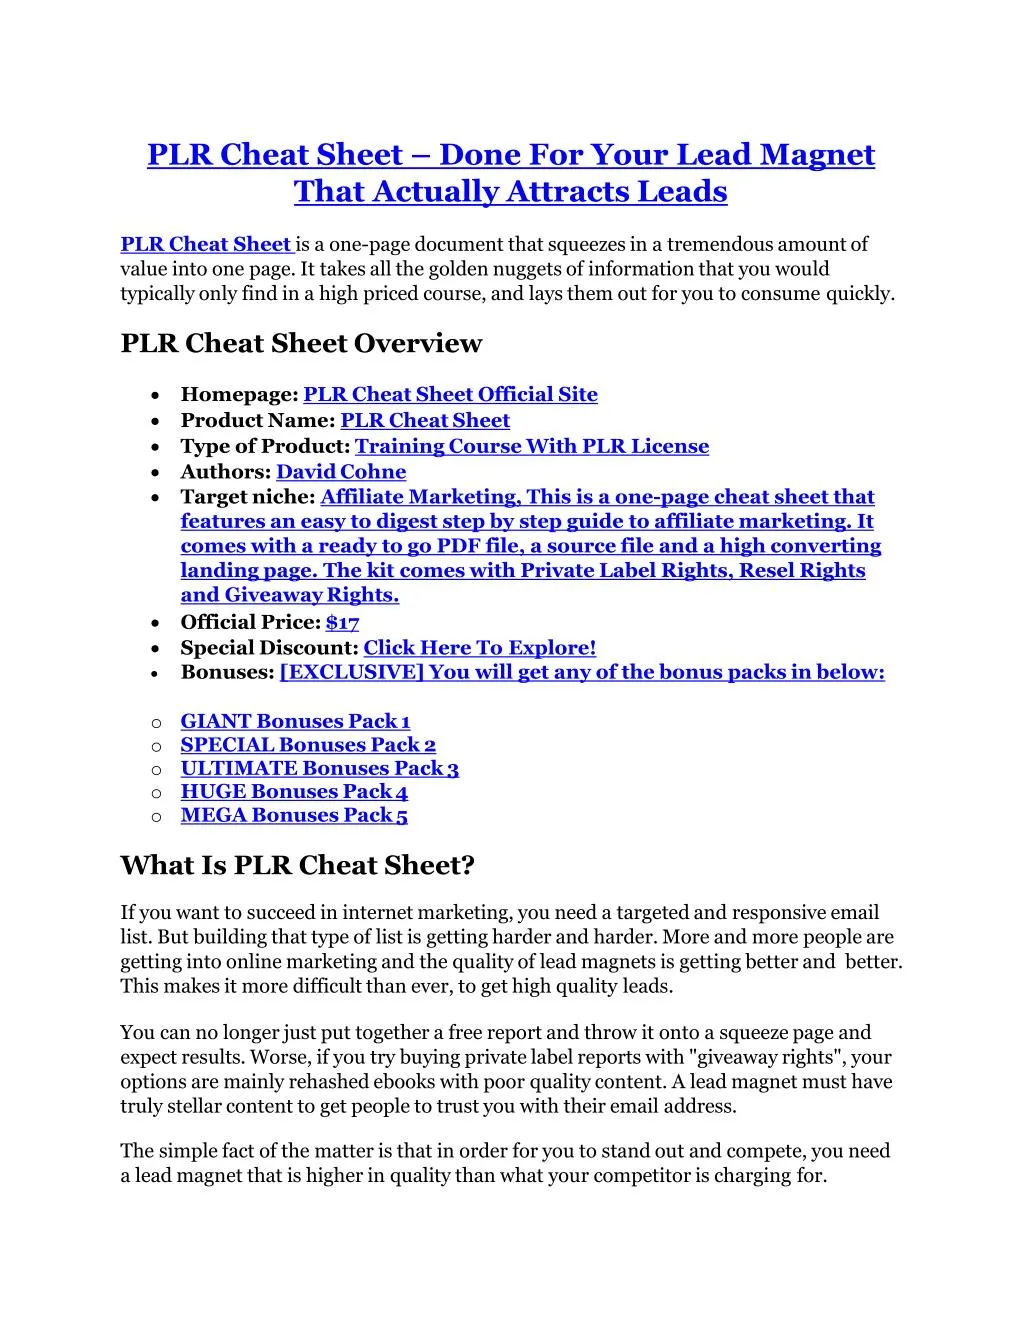 plr cheat sheet done for your lead magnet that